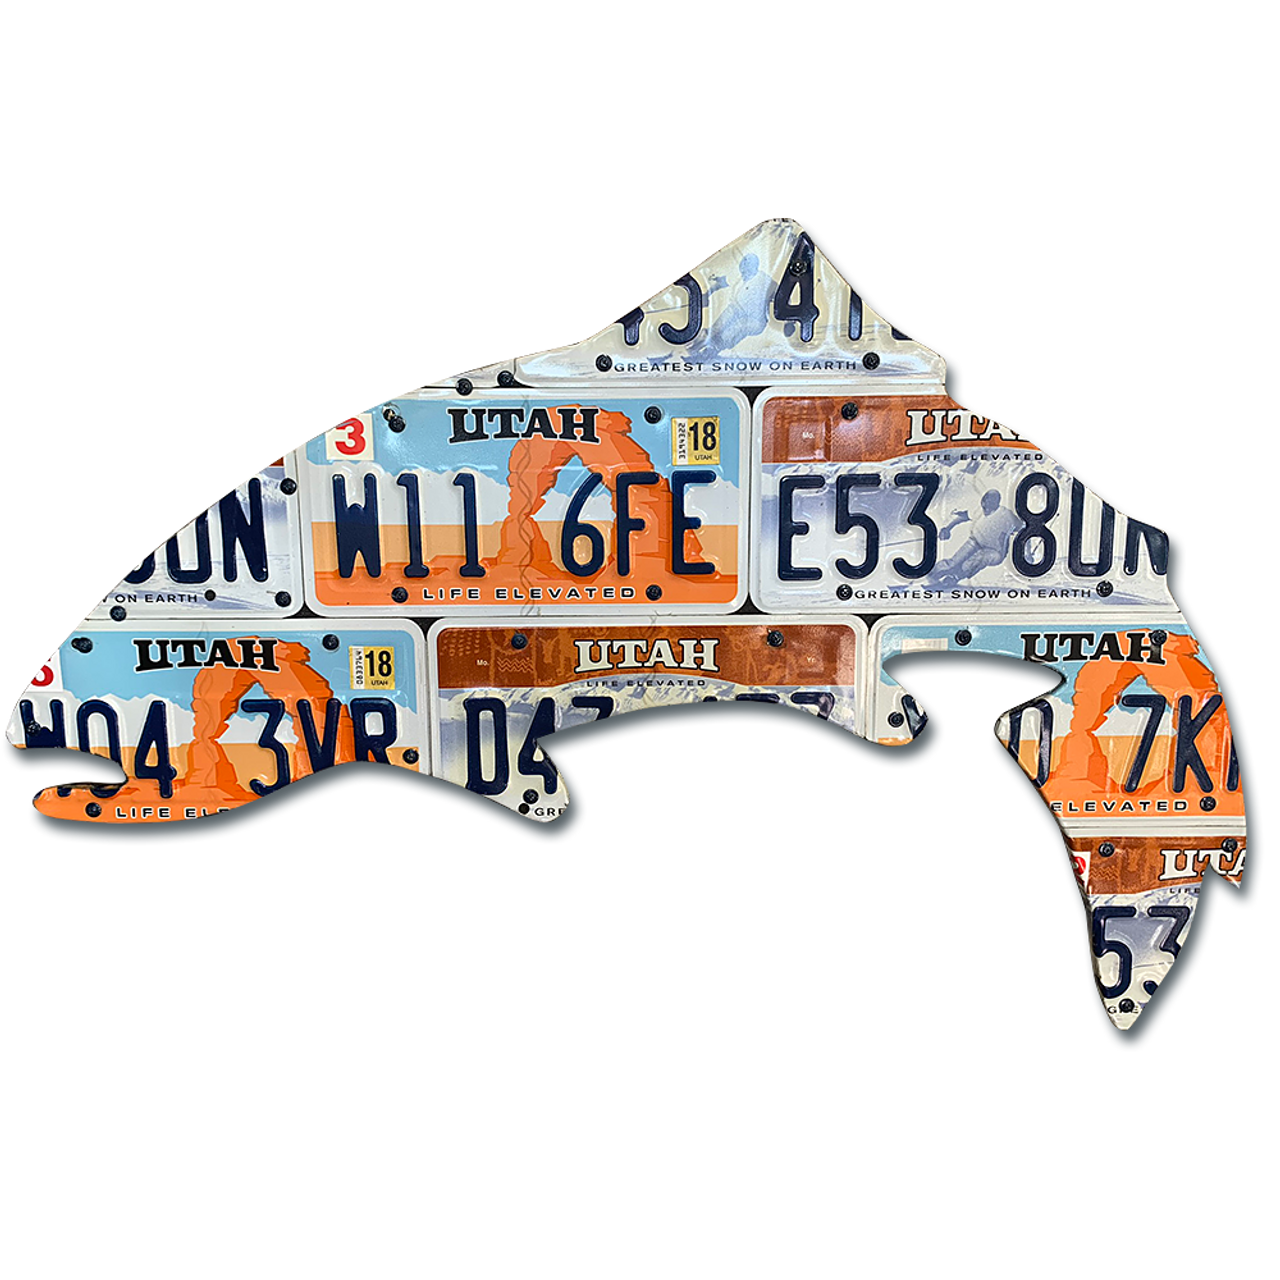 Trout License Plate Art - Cody Richardson - The Fly Shop